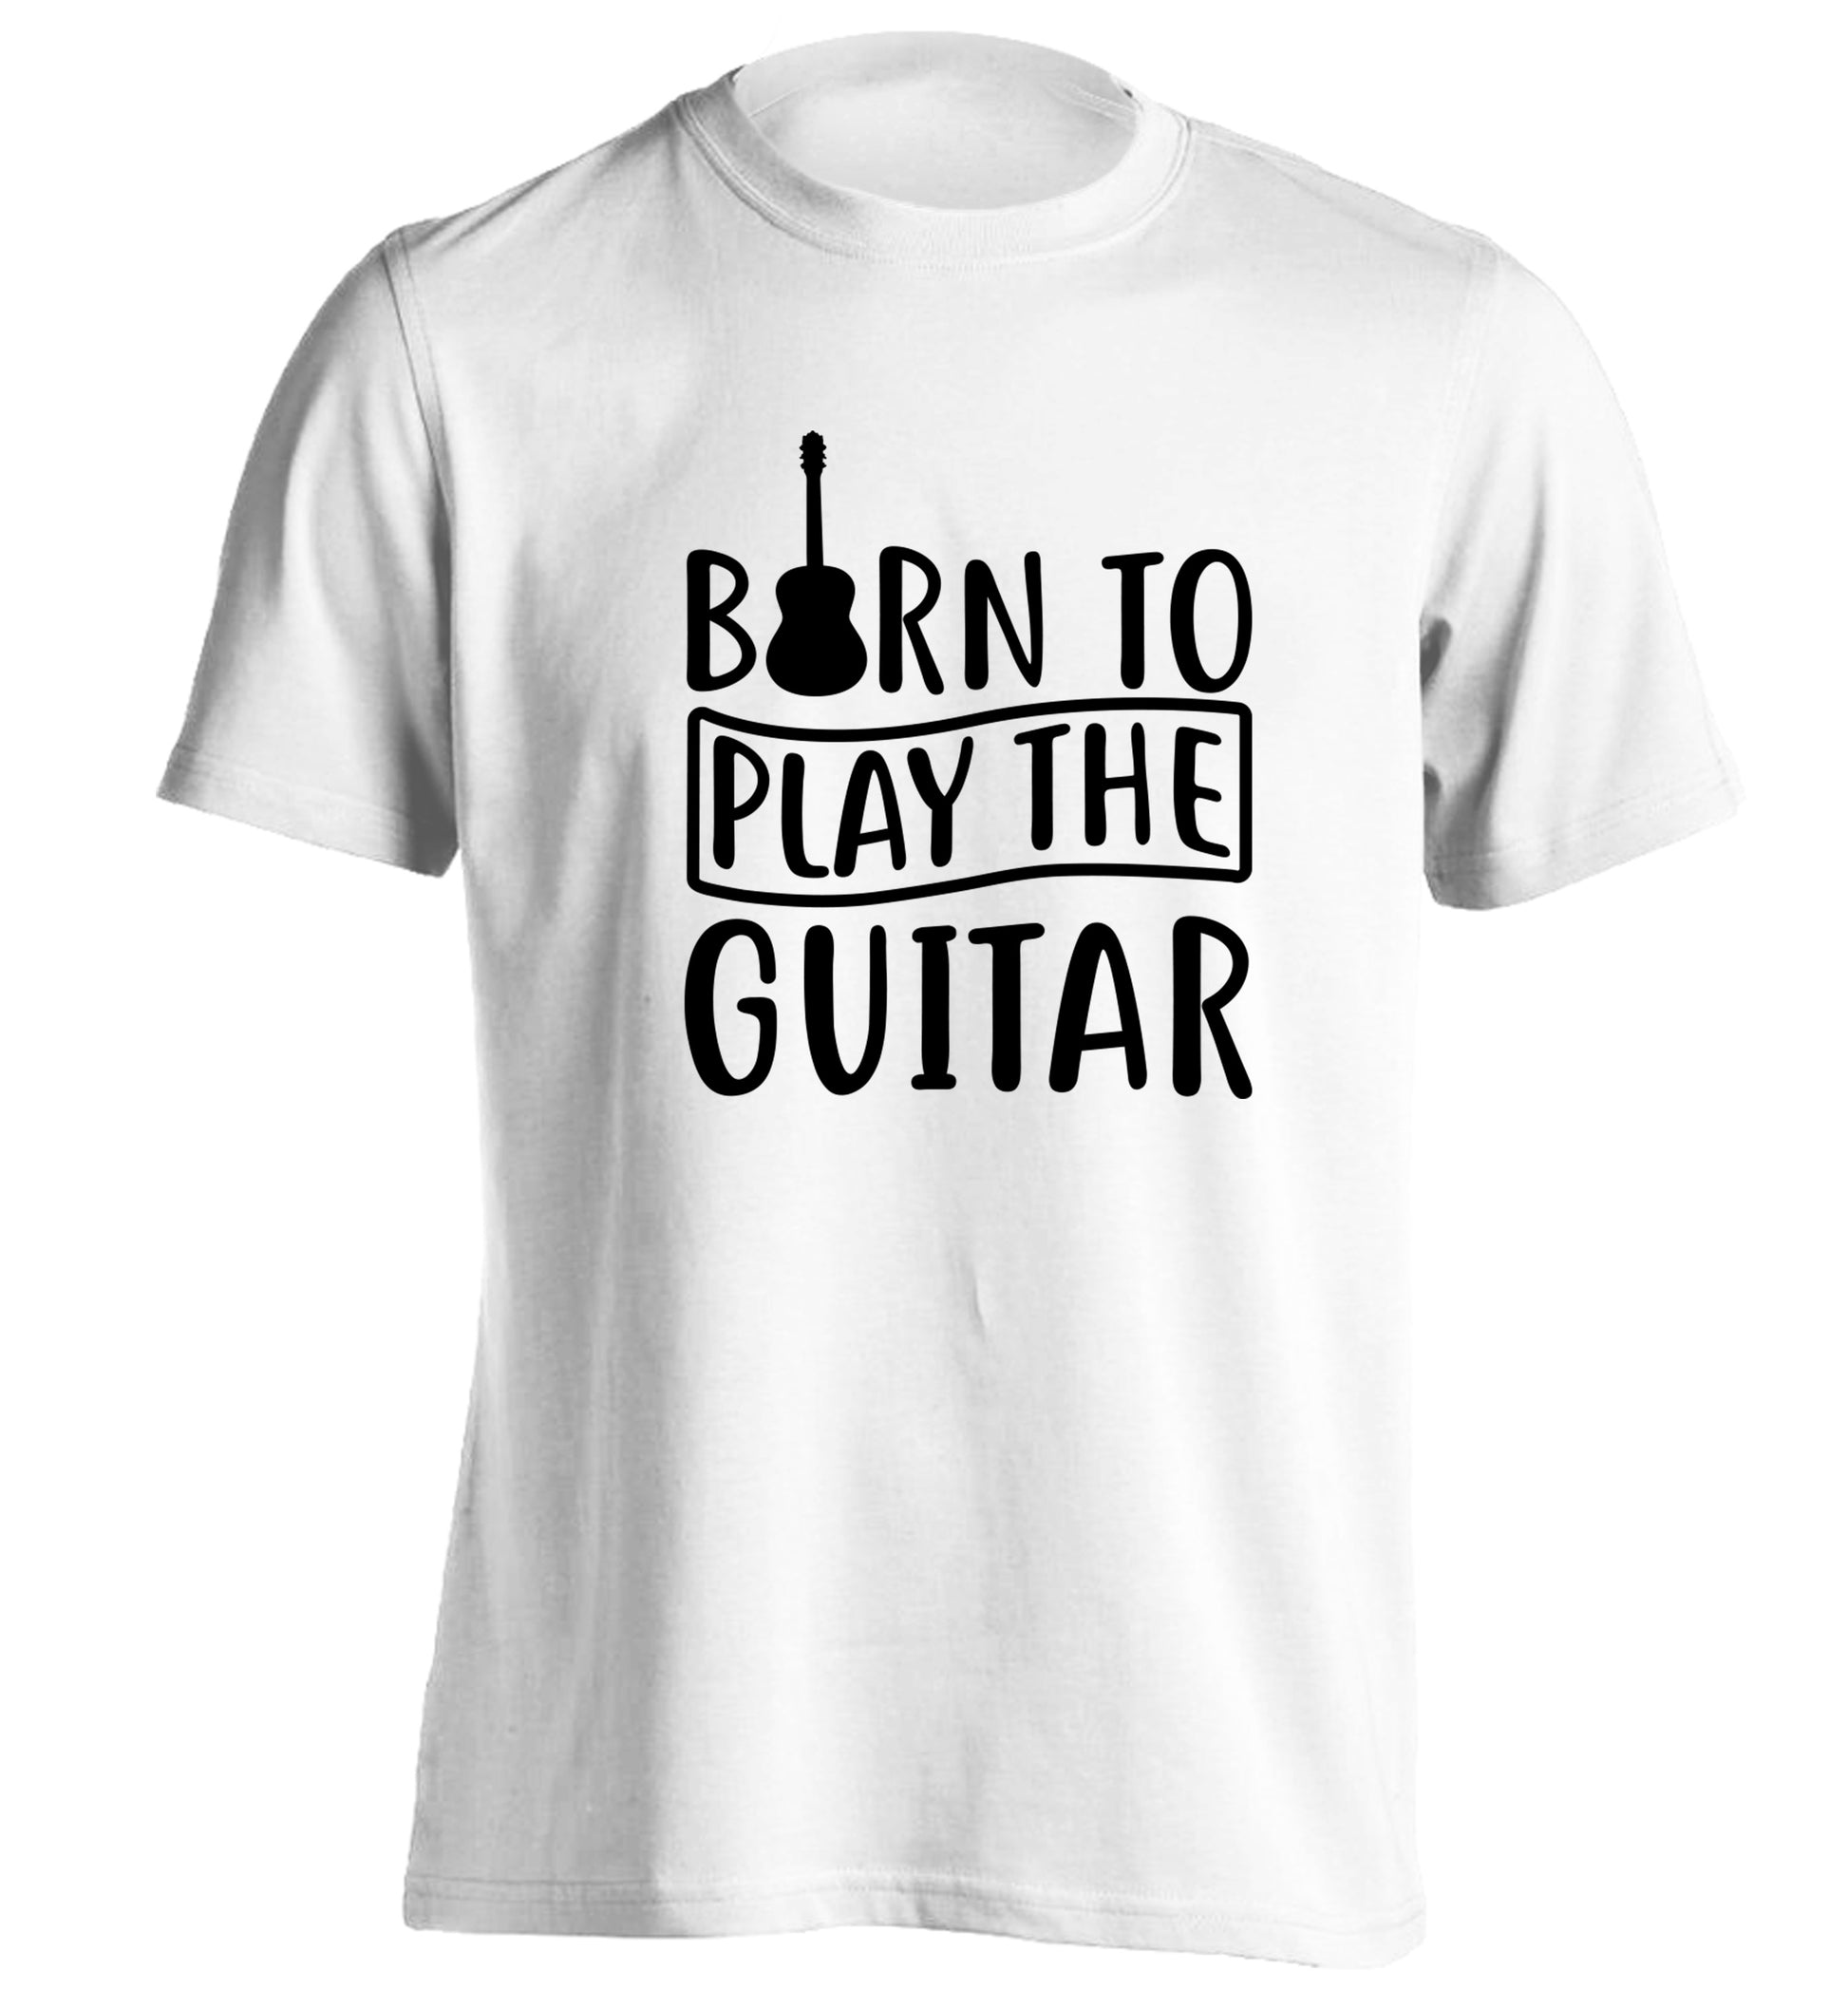 Born to play the guitar adults unisex white Tshirt 2XL